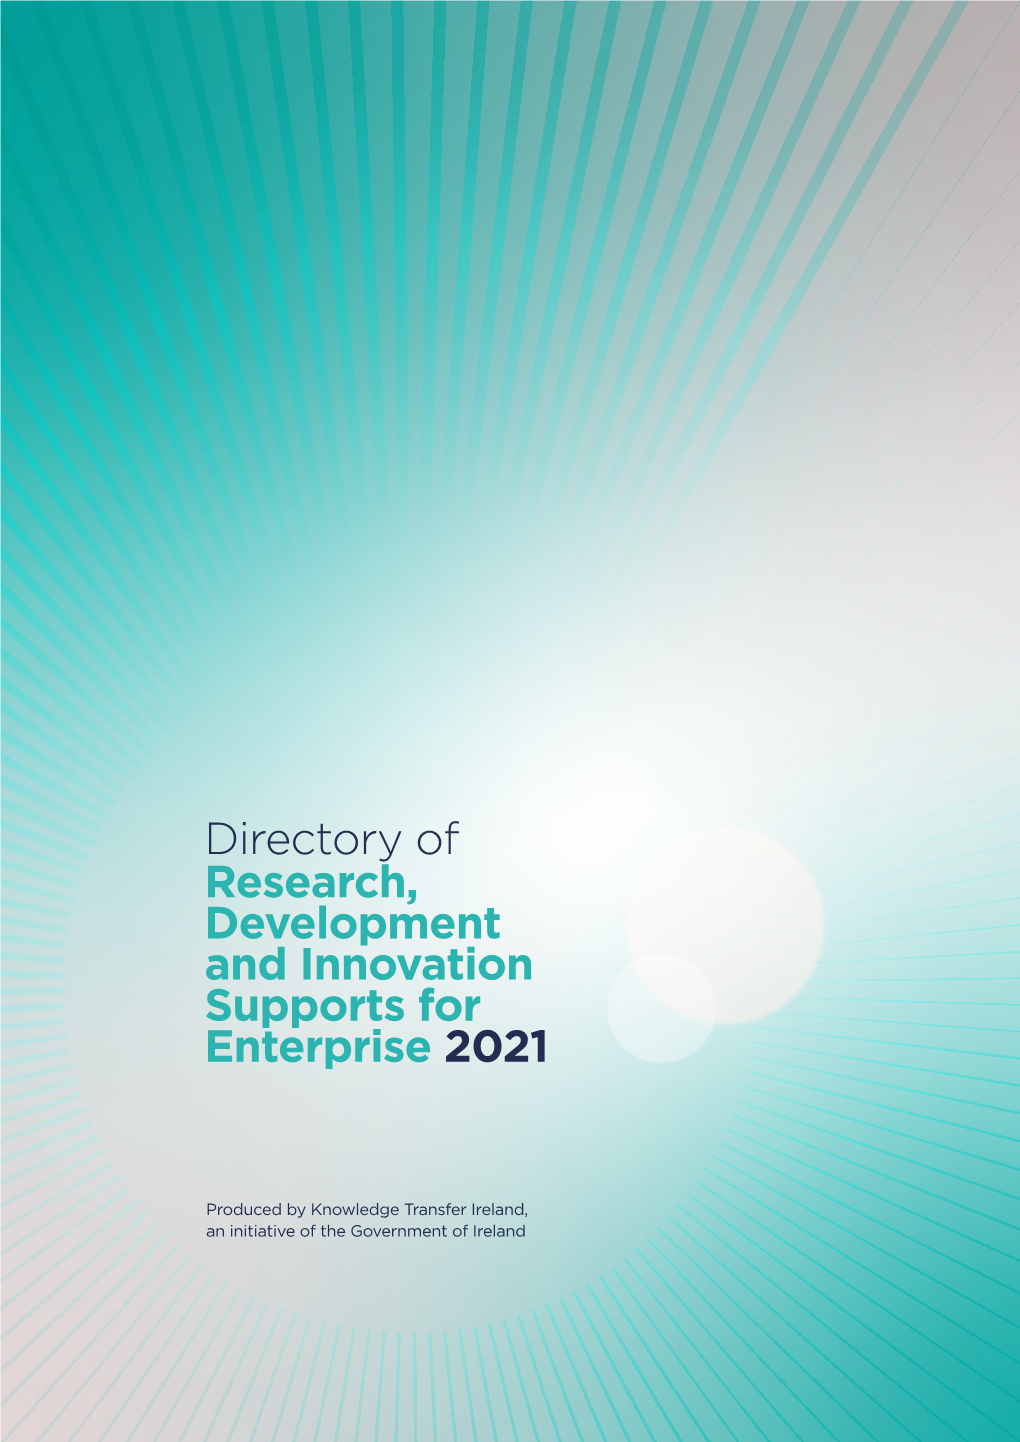 Research, Development and Innovation Supports for Enterprise 2021